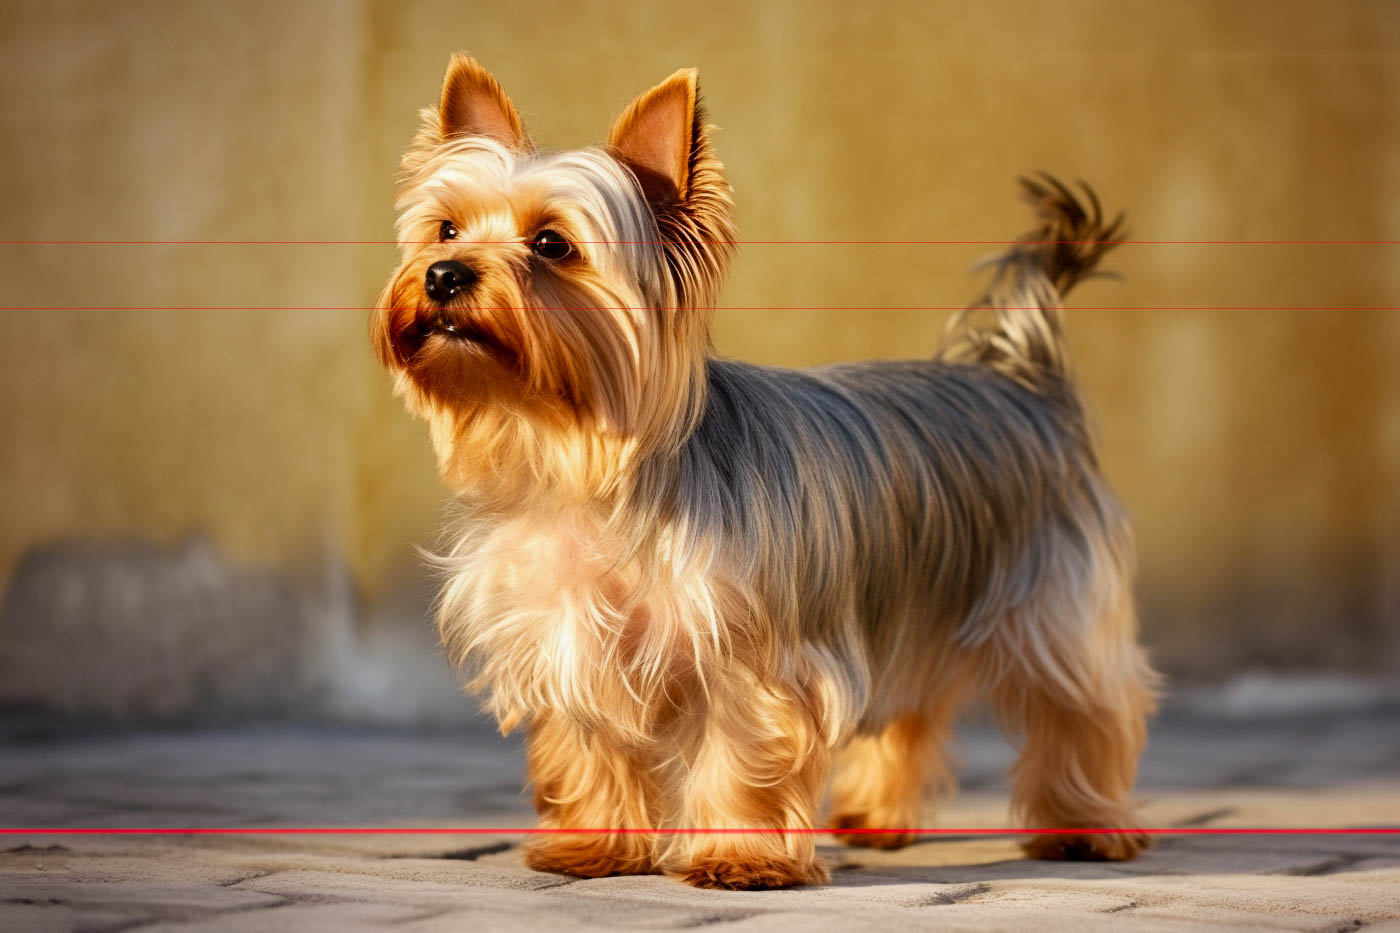 A picture of a Yorkie stands on a sunlit, outdoor stone surface with long, silky fur in a mix of golden brown and silver hues. Its ears are perked up, and it looks alert, gazing into the distance. The background is softly blurred with warm tones, highlighting the Yorkshire Terrier.